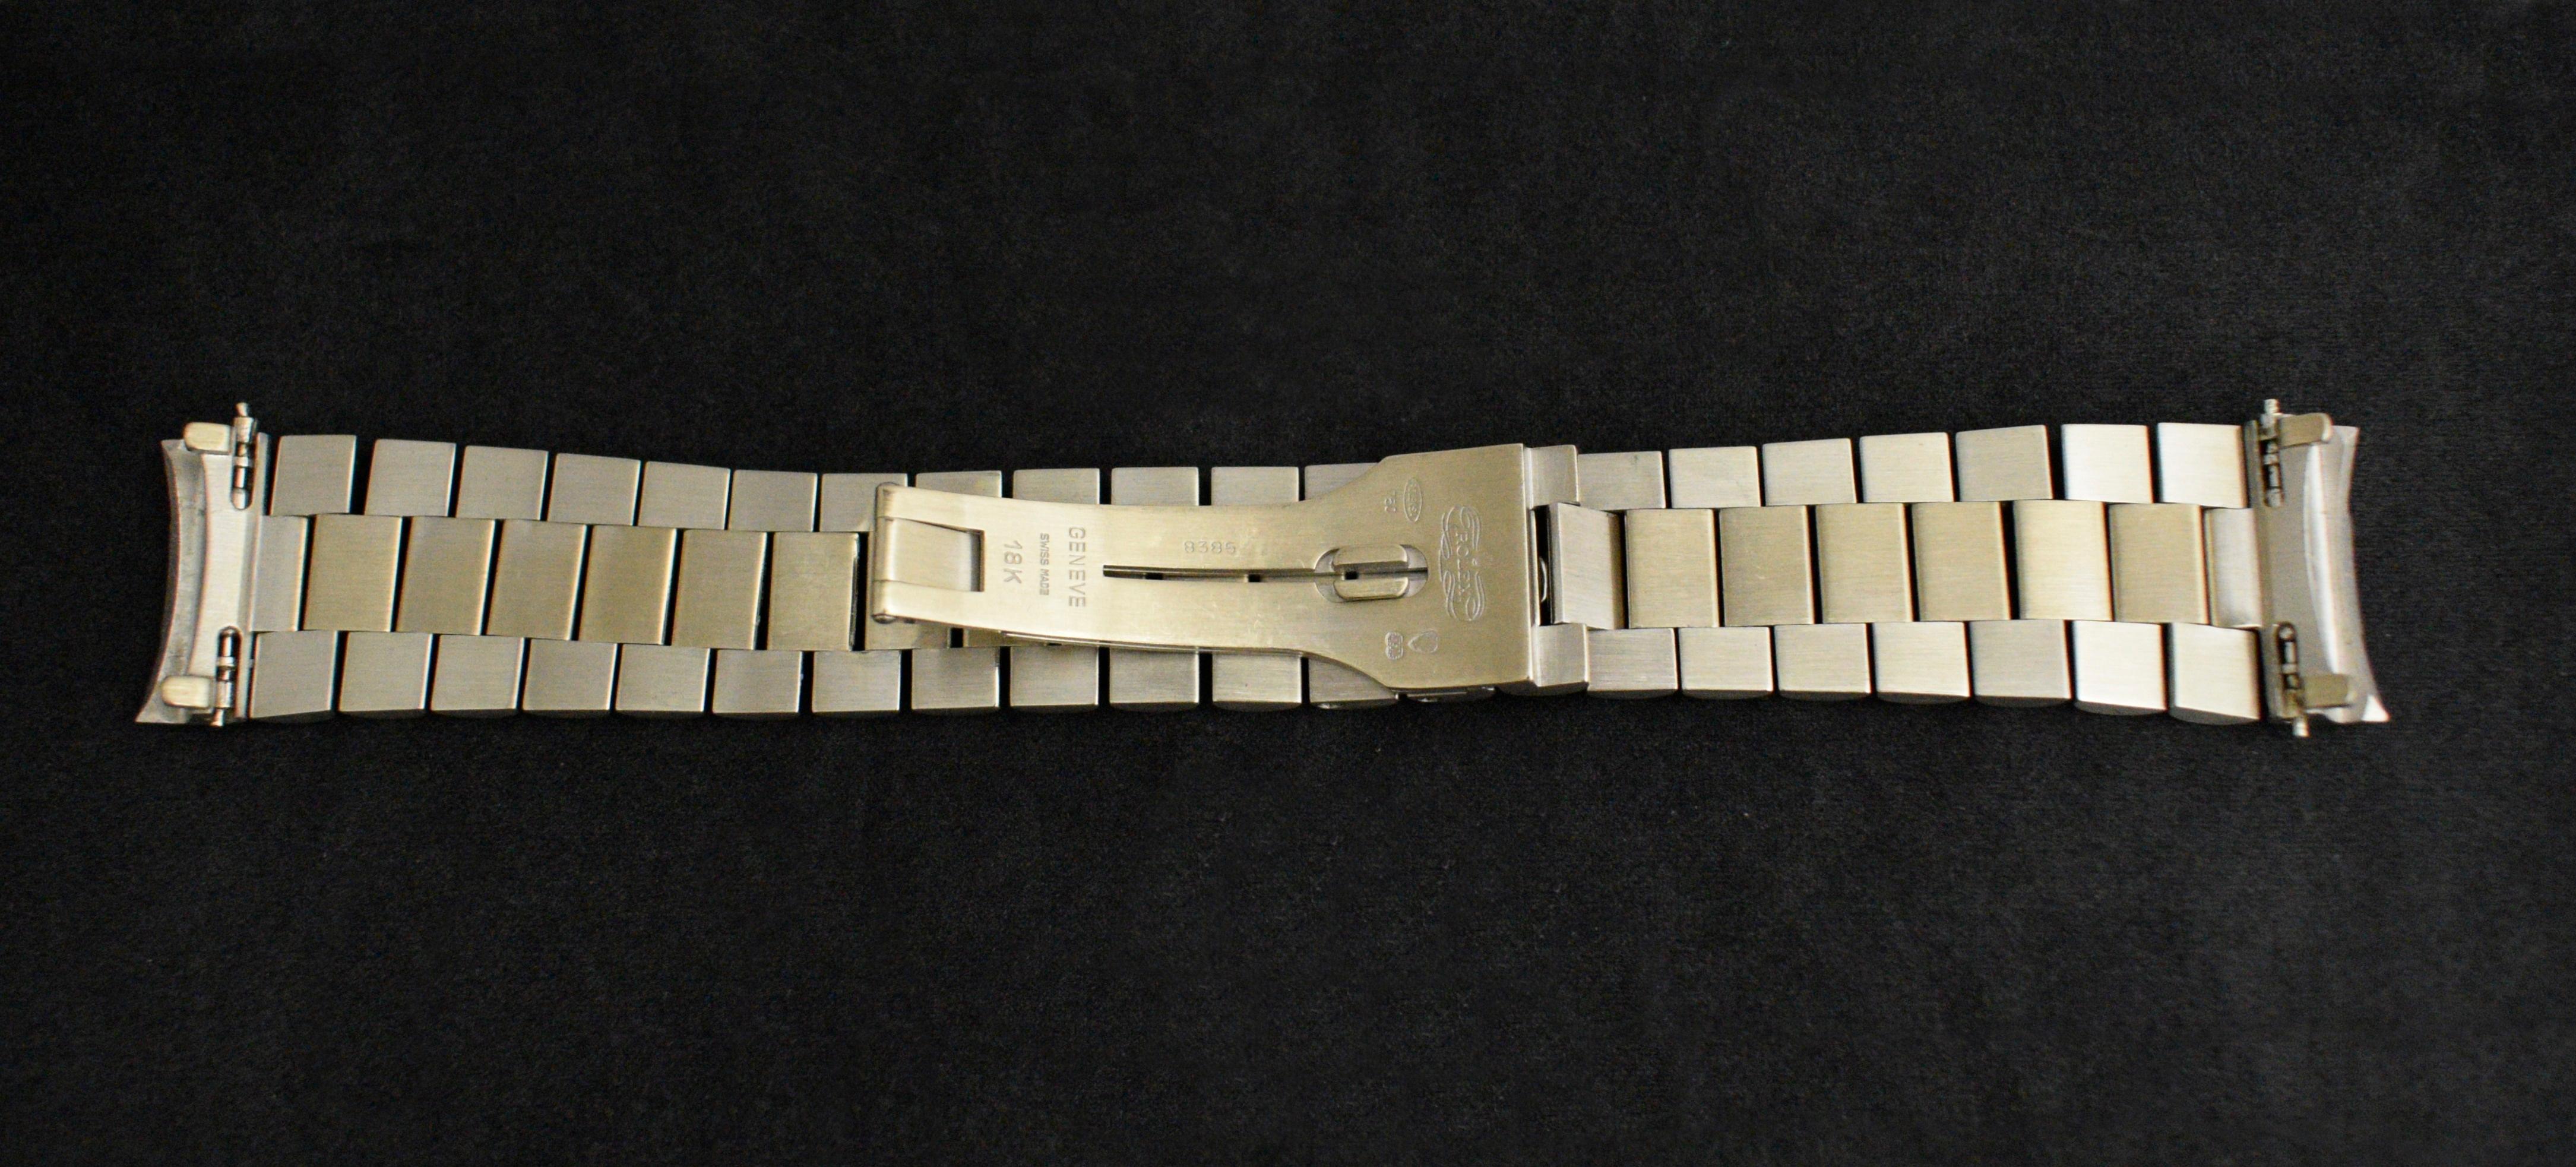 Rolex Day-Date 18K WG White Gold Ombre Blue Dial Diamond 18038 Auto Watch, 1982 For Sale 3